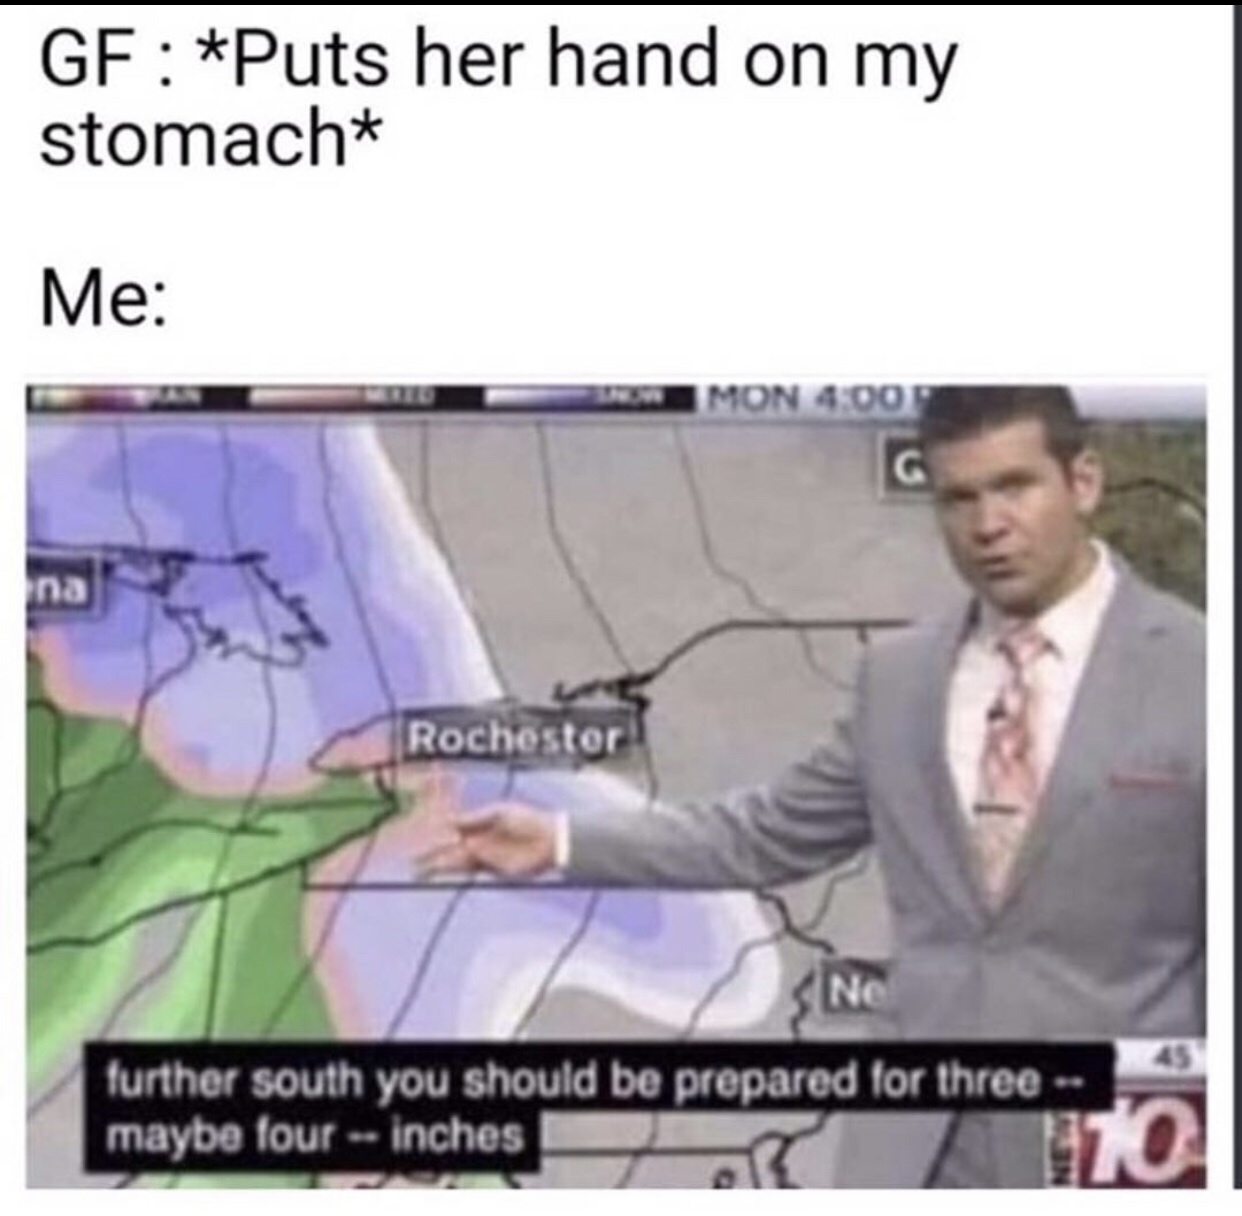 gf puts her hand on my stomach - Gf Puts her hand on my stomach Me Mon Rochester SNe further south you should be prepared for three maybe four inches